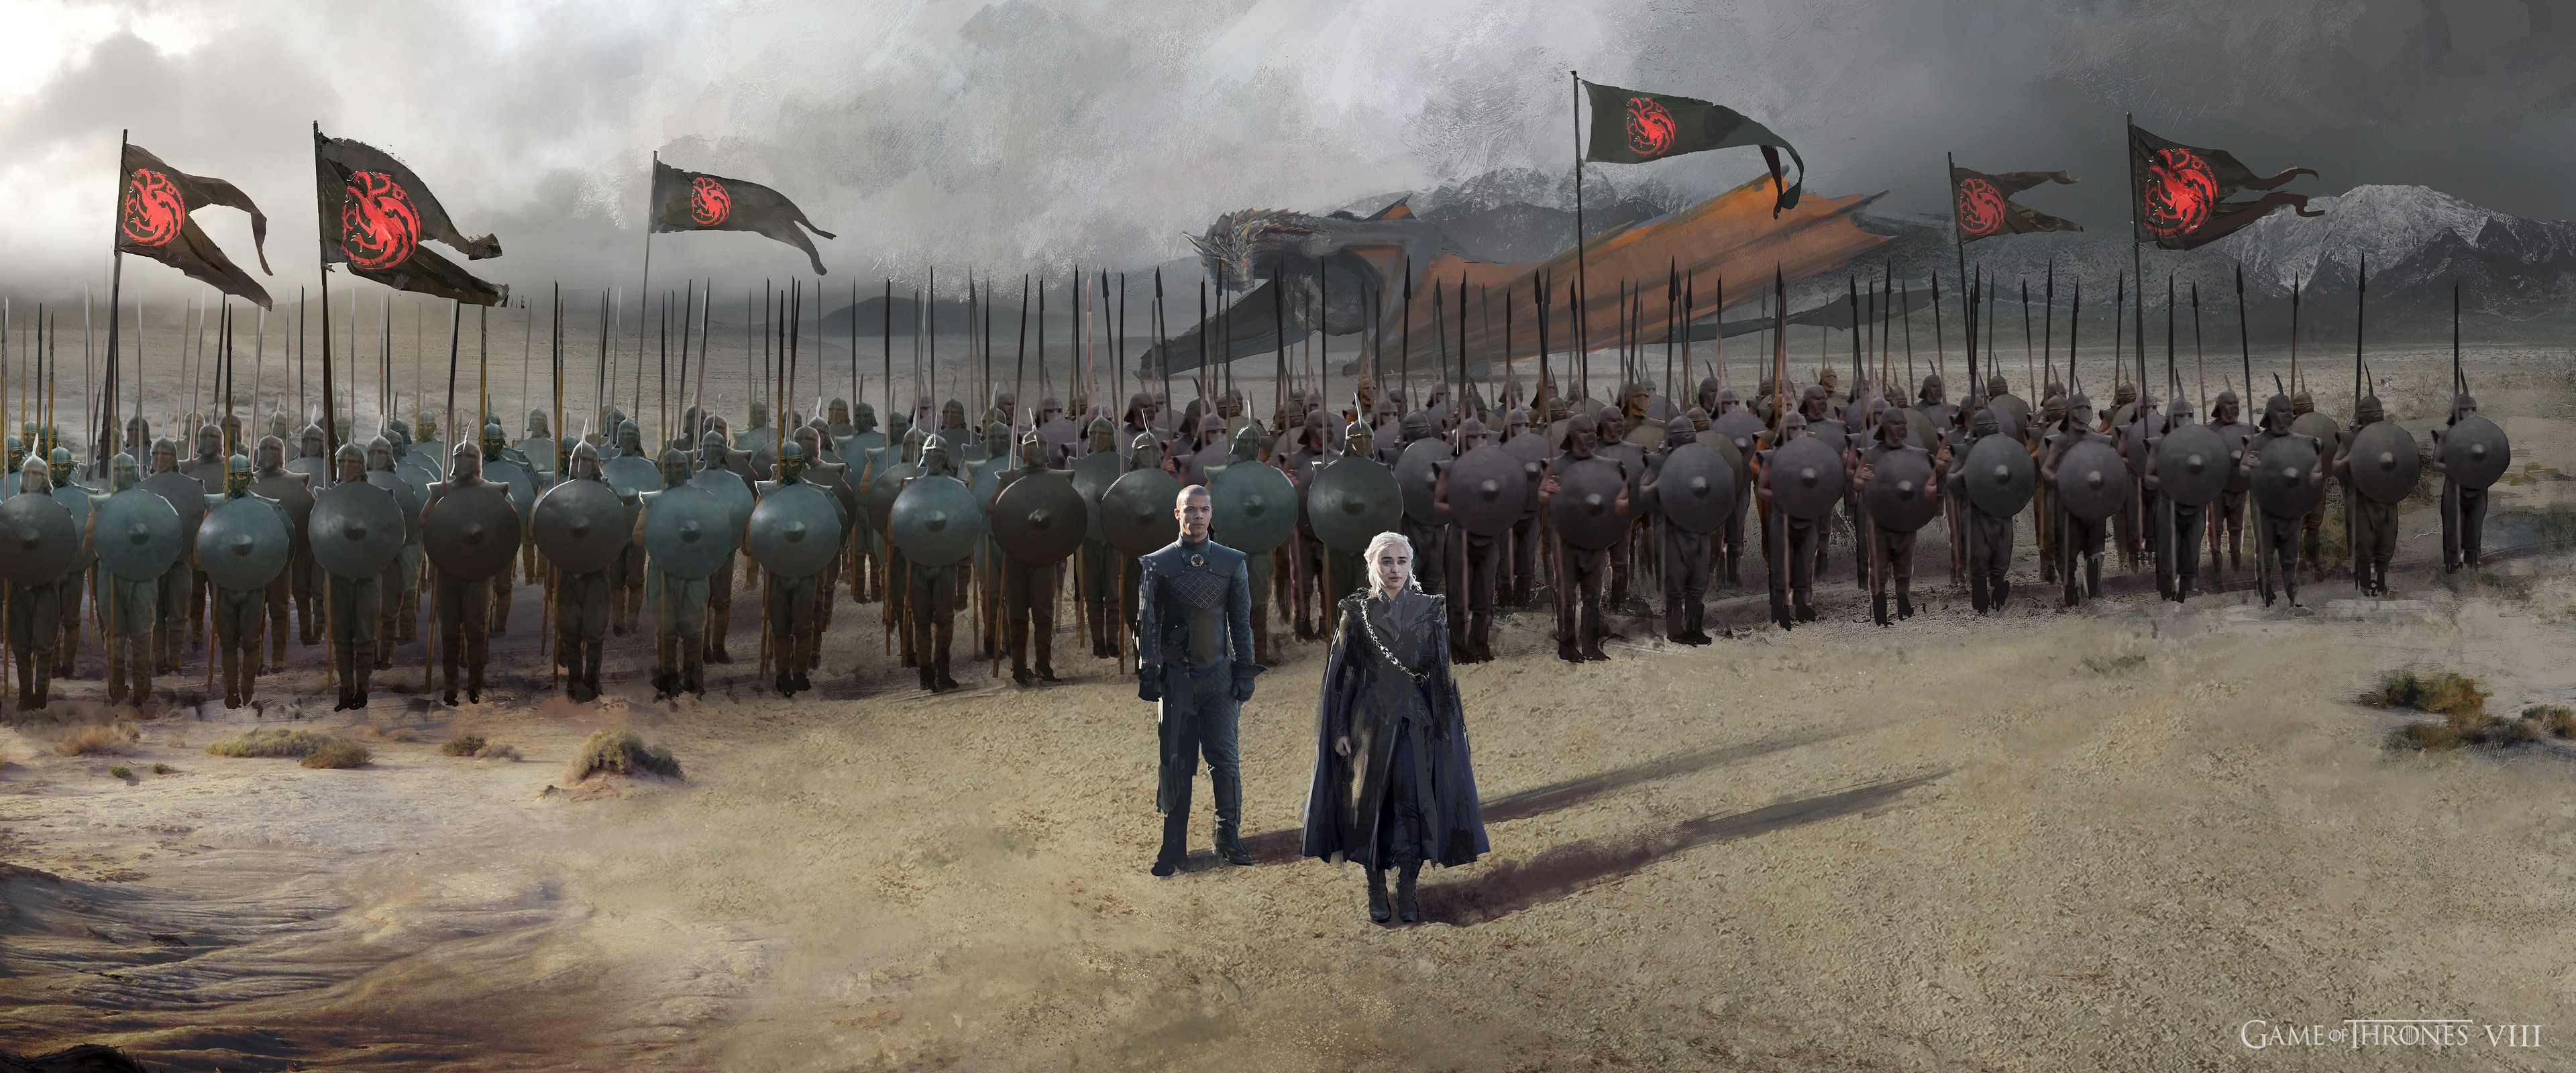 View of Daenerys with a small contingent of Unsullied soldiers